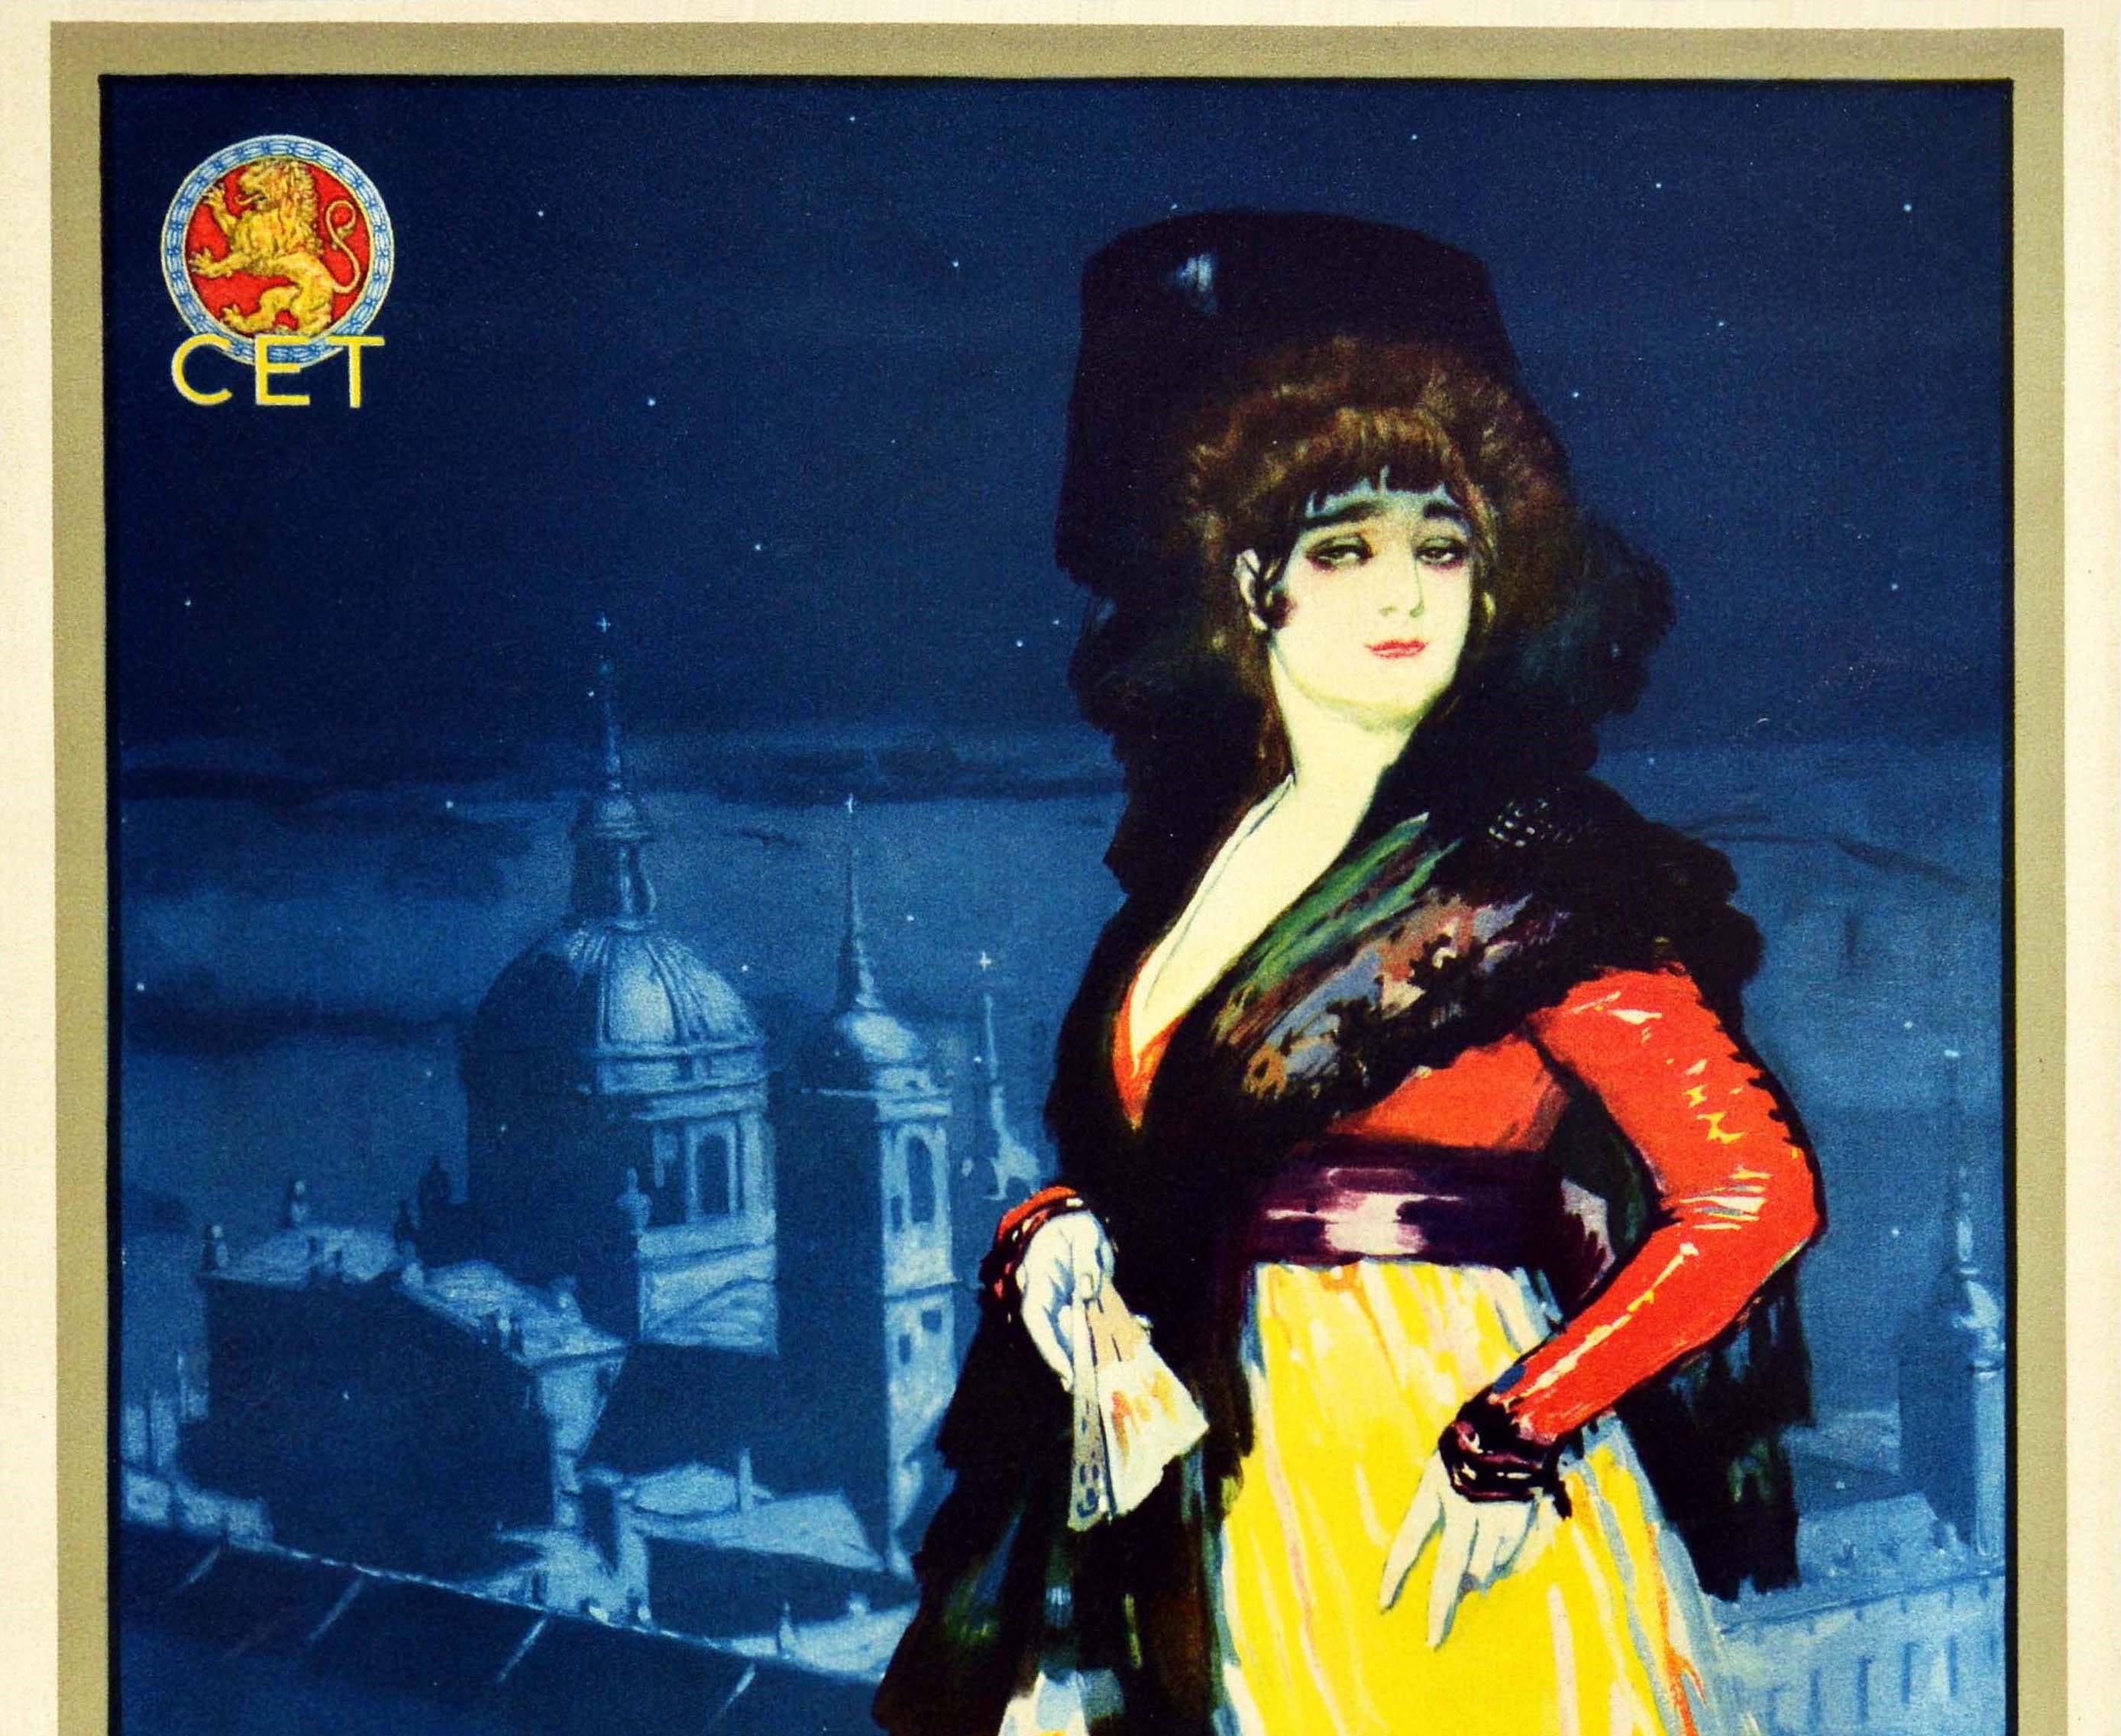 Original vintage travel poster - Visitad Espana el Paraiso de los Turistas / Visit Spain the Paradise of Tourists - featuring artwork by the Spanish painter Jose Segrelles Albert (1885-1969) of a lady in a traditional dress and shawl and carrying a